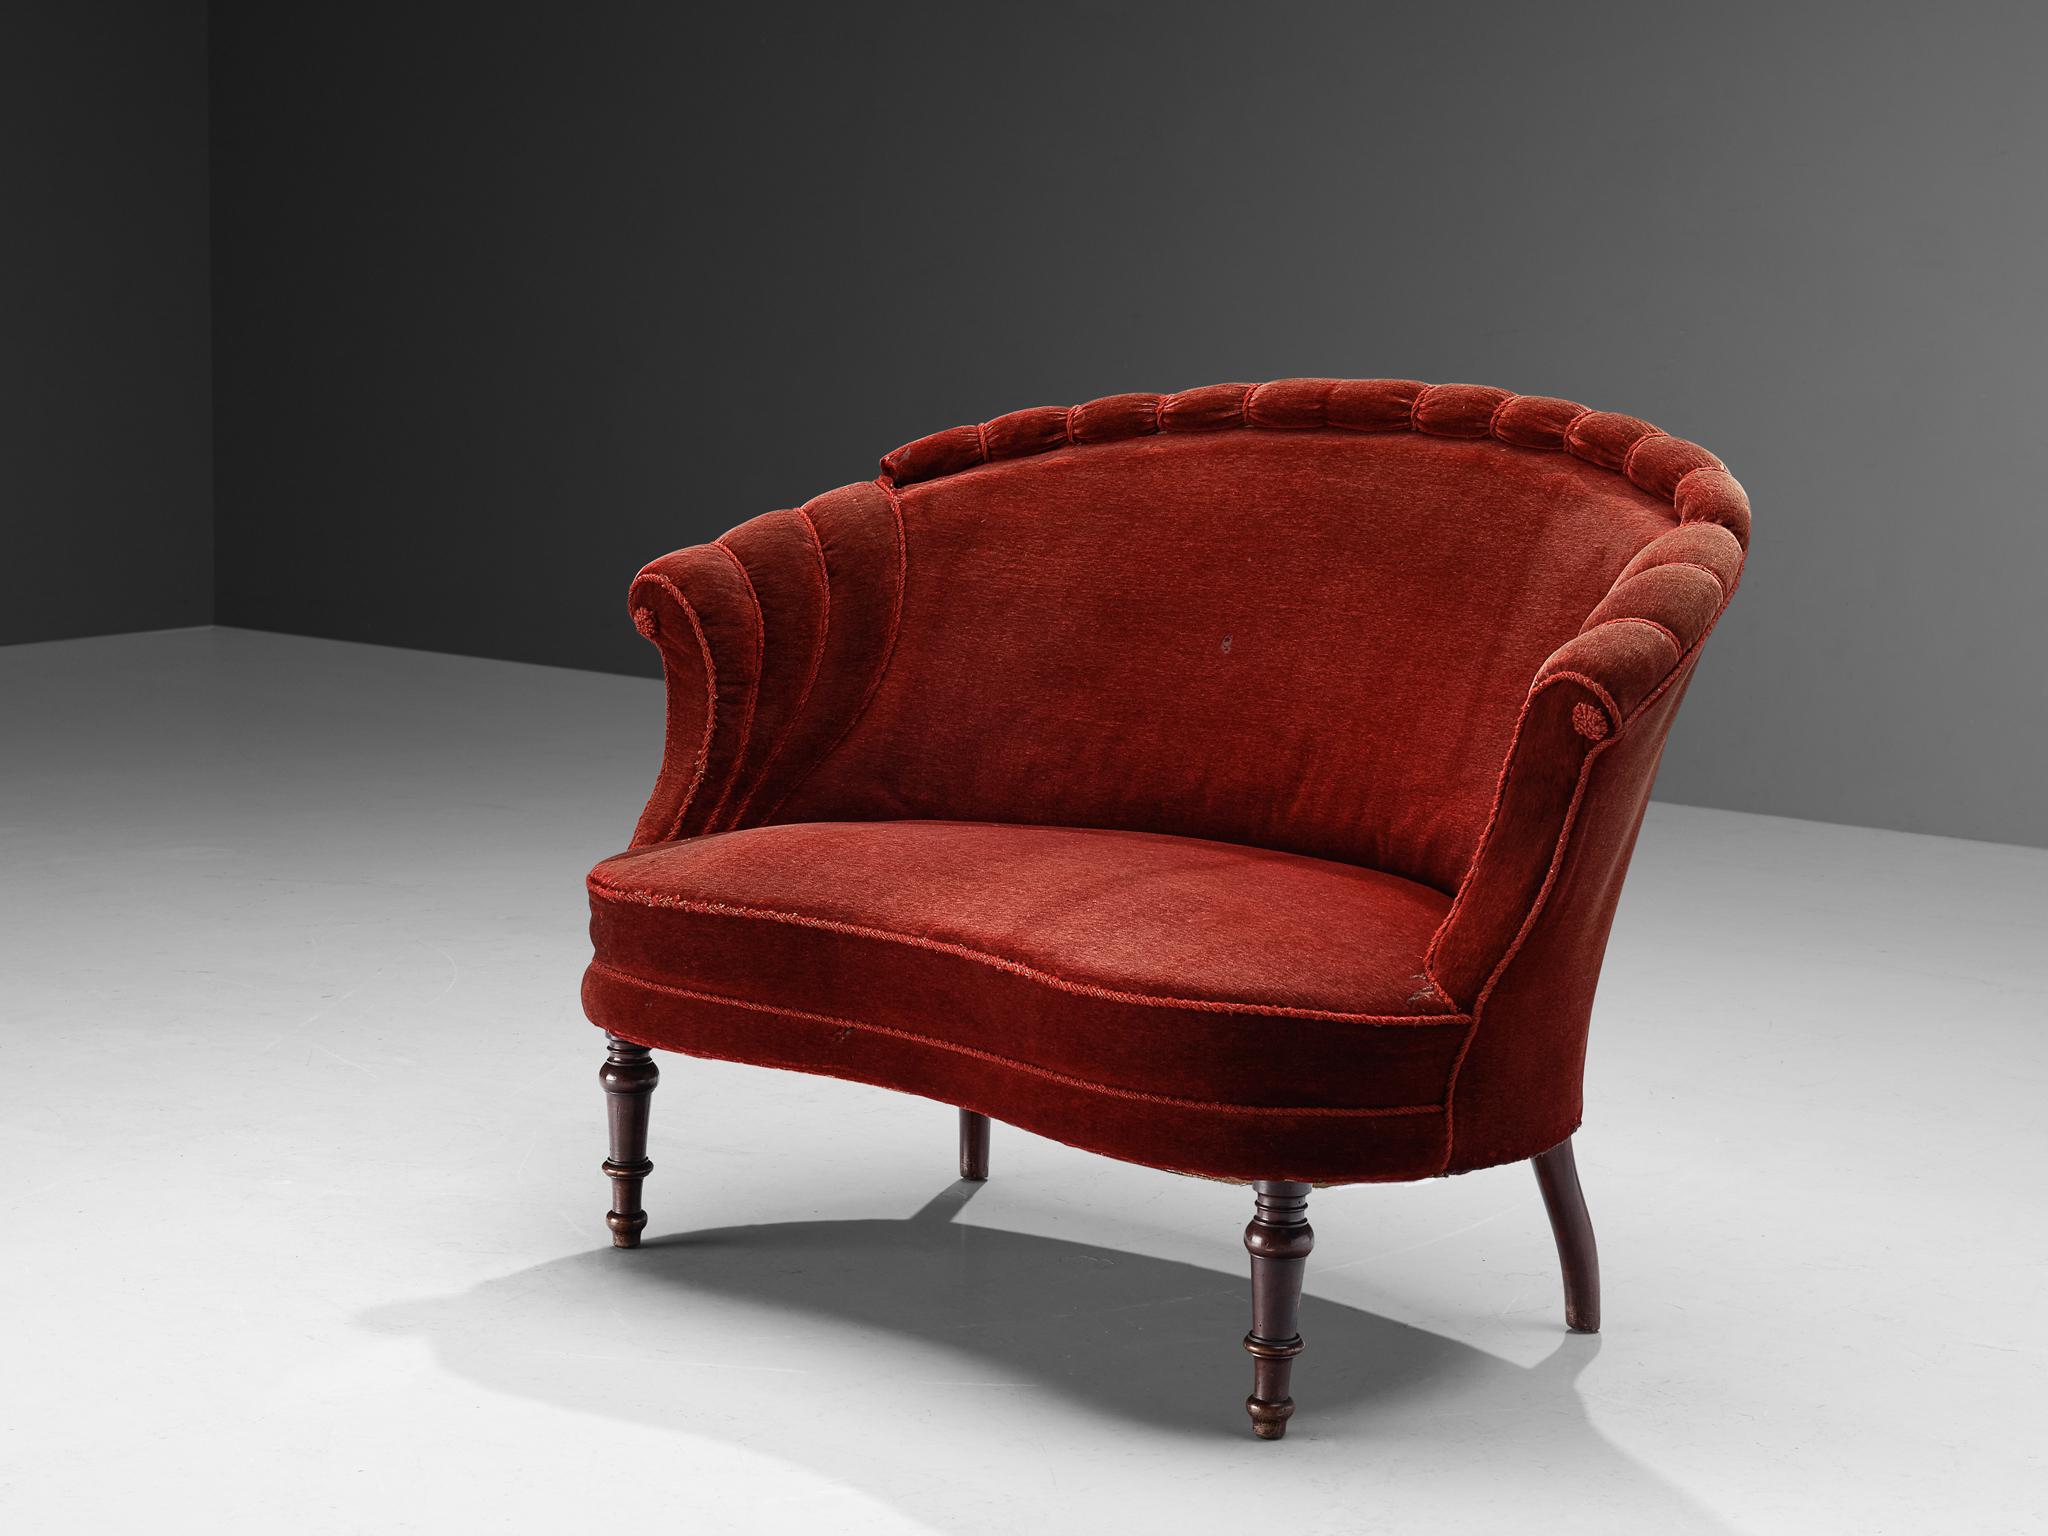 Mid-20th Century French Settee in Red Velvet Upholstery  For Sale